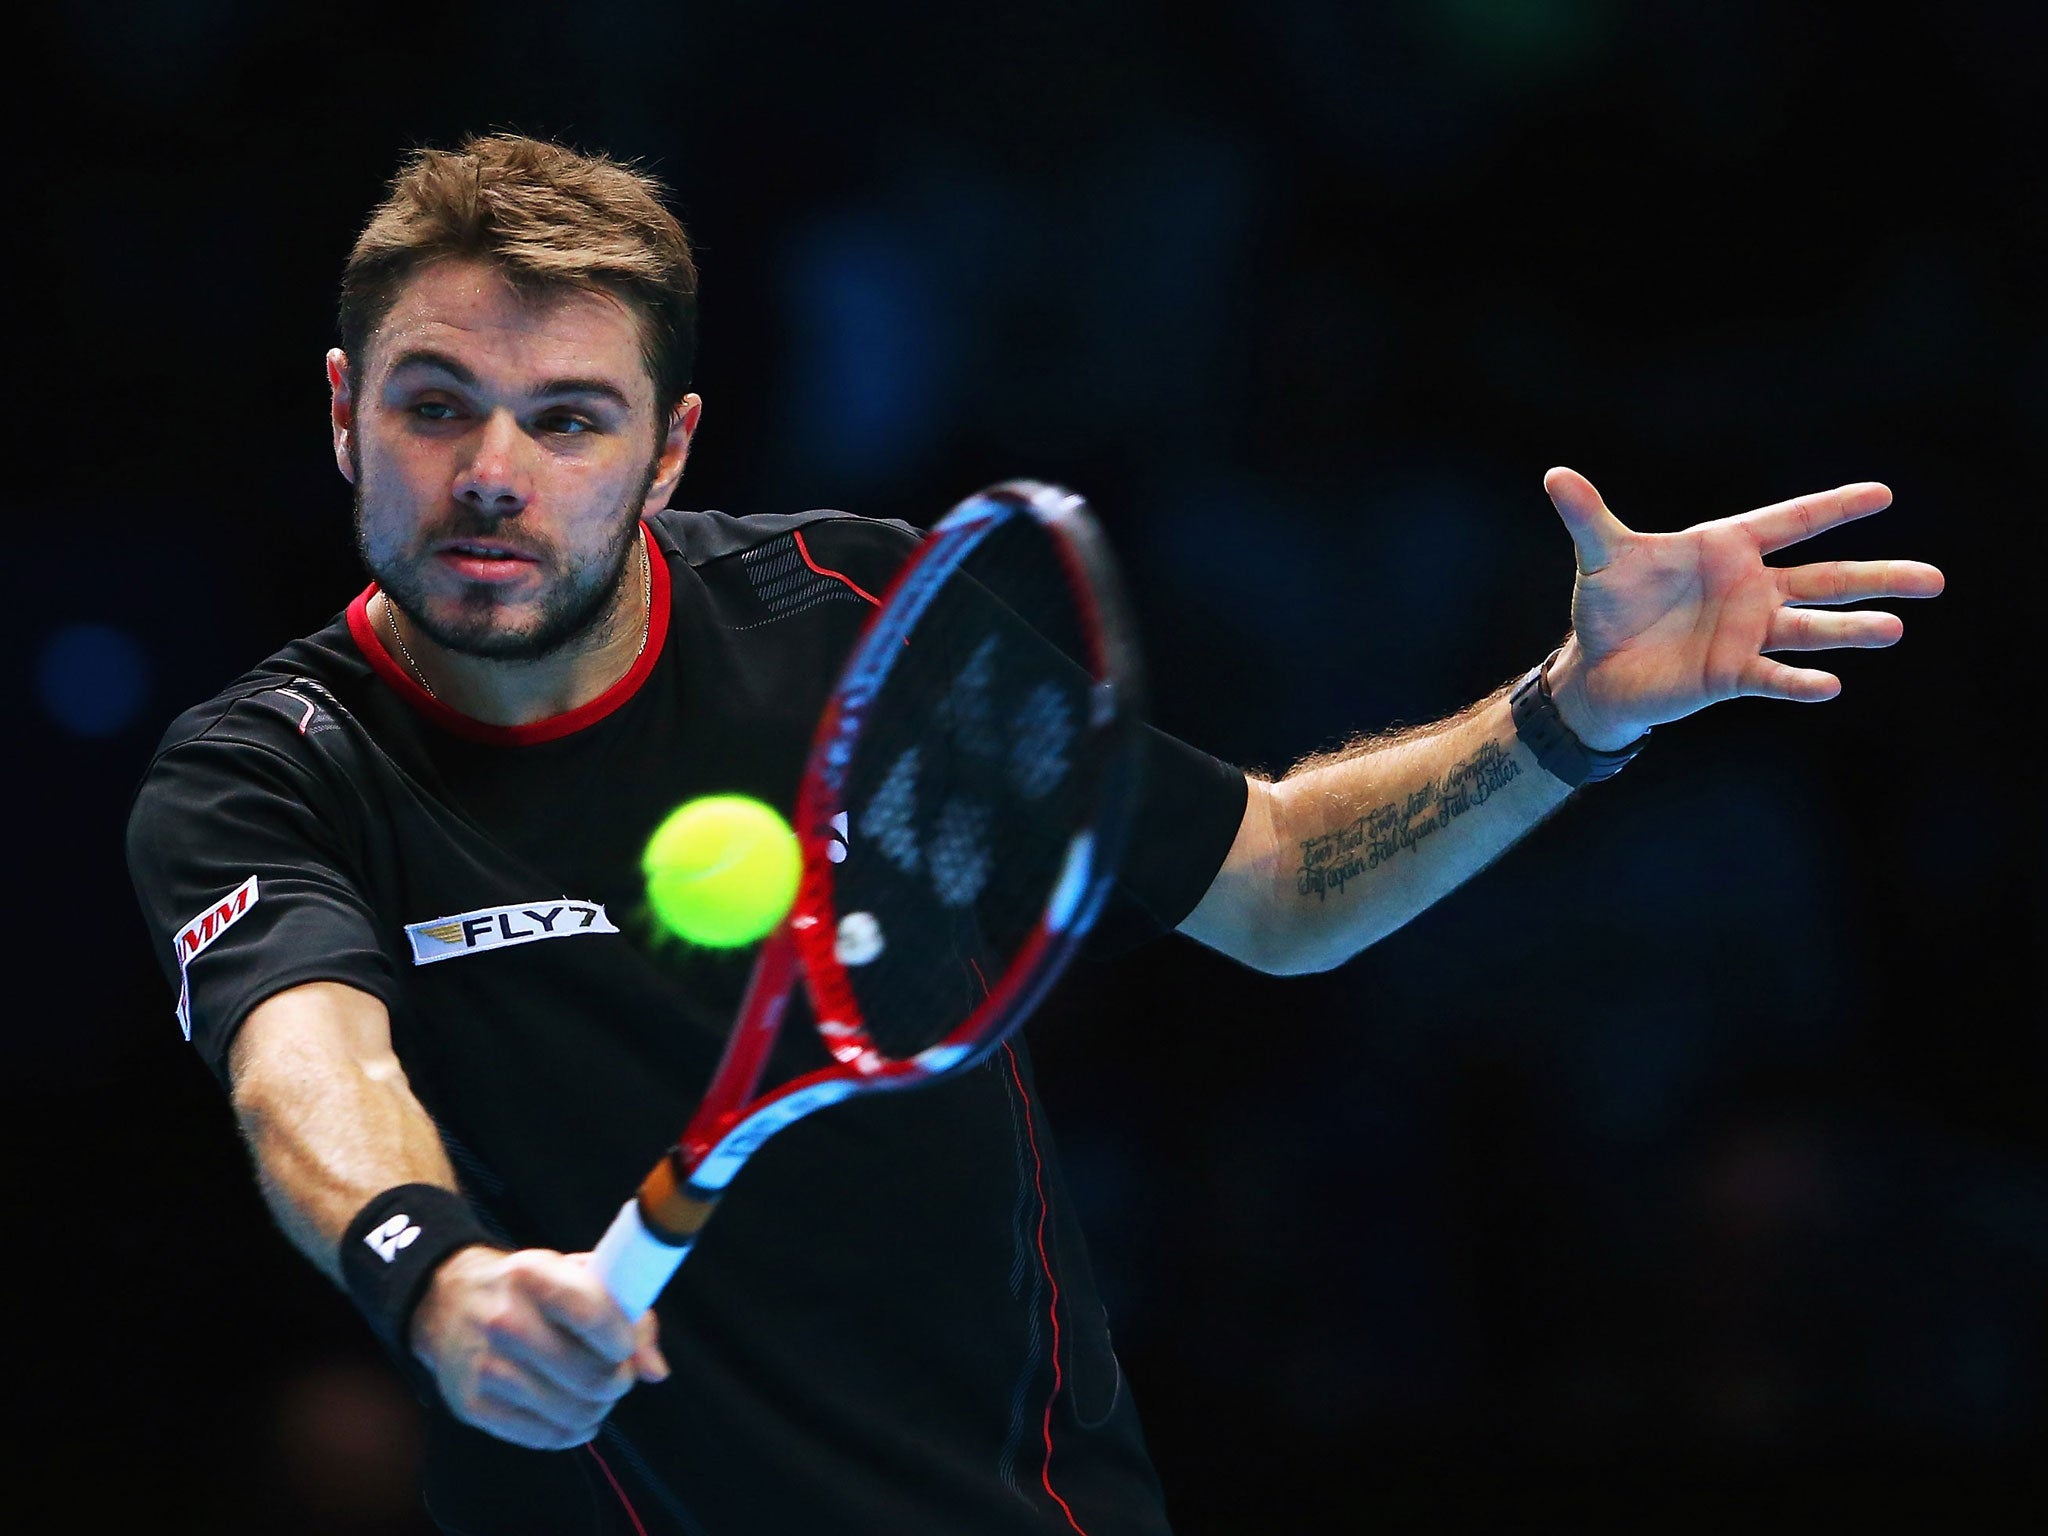 Stanislas Wawrinka has secured his place in the last four of the Barclays ATP World Tour Finals